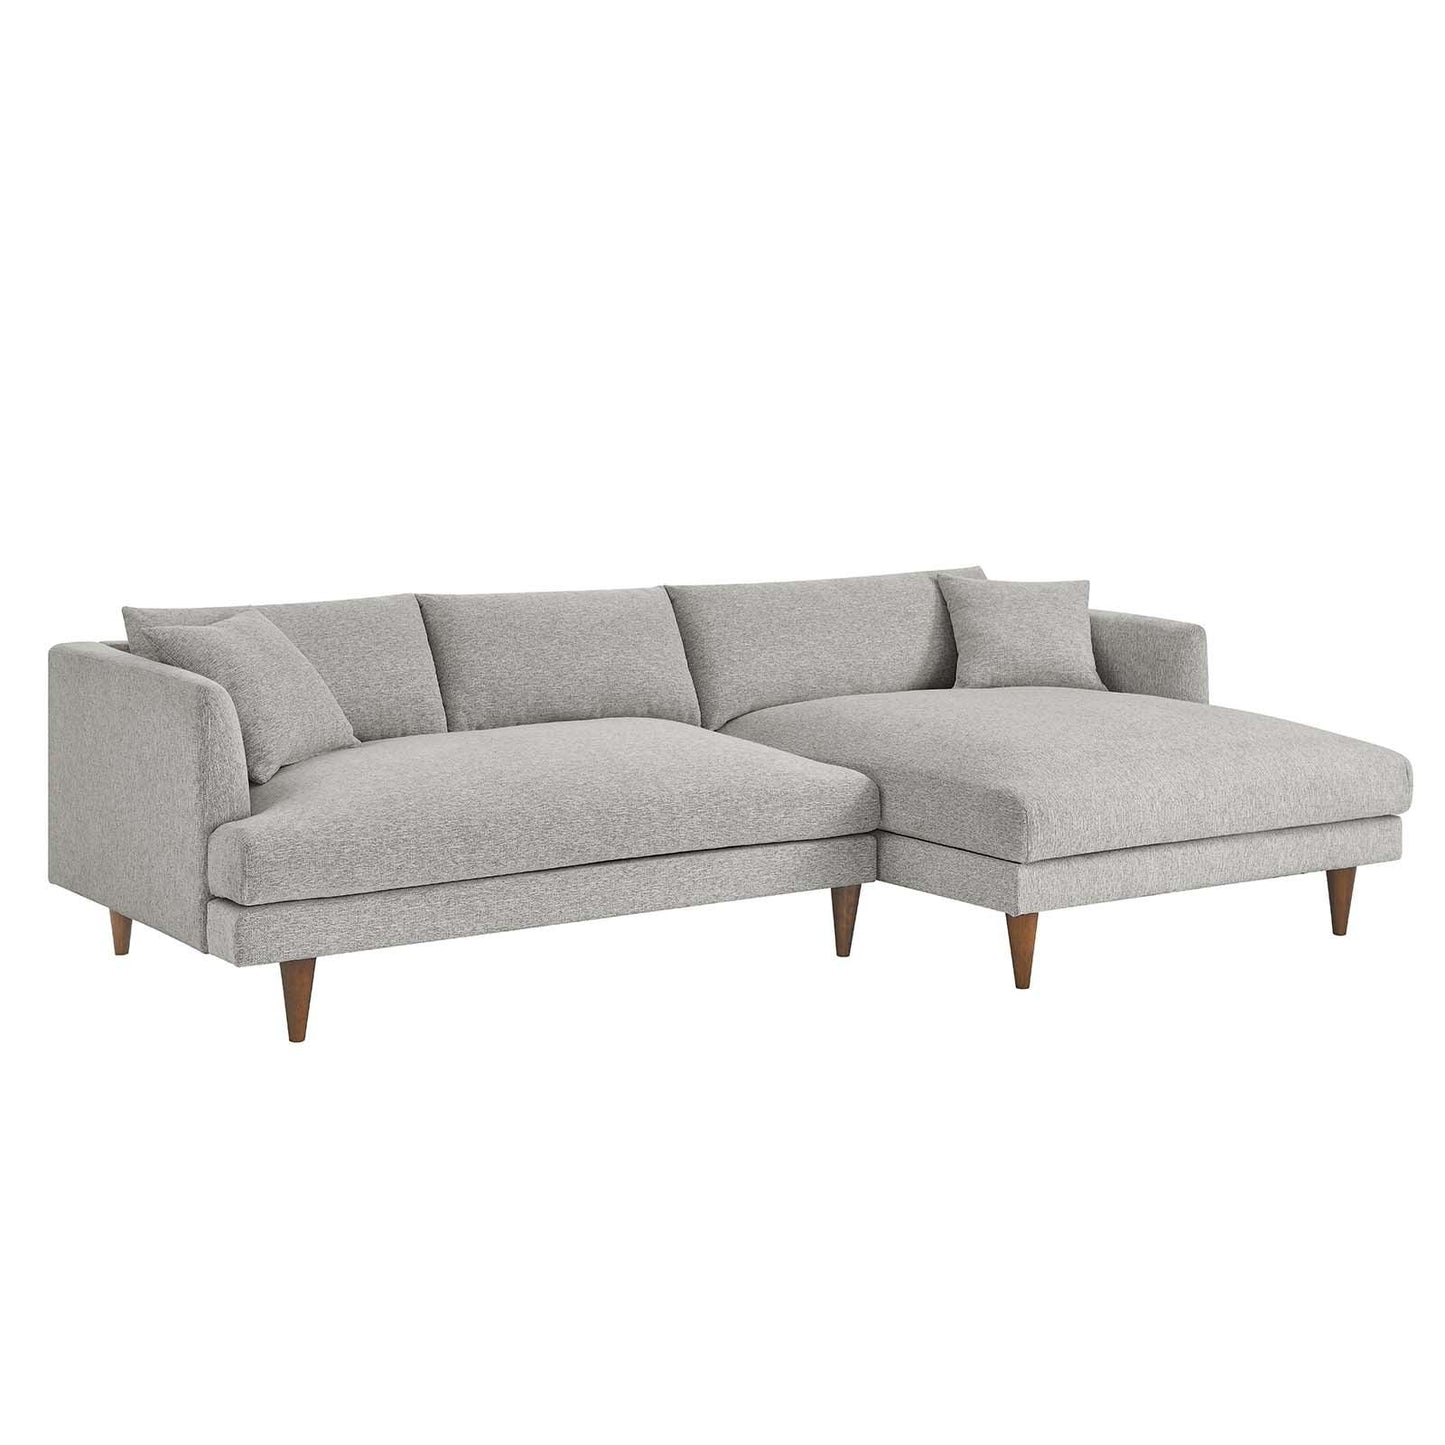 Modway Zoya Right-Facing Down Filled Overstuffed Sectional Sofa FredCo